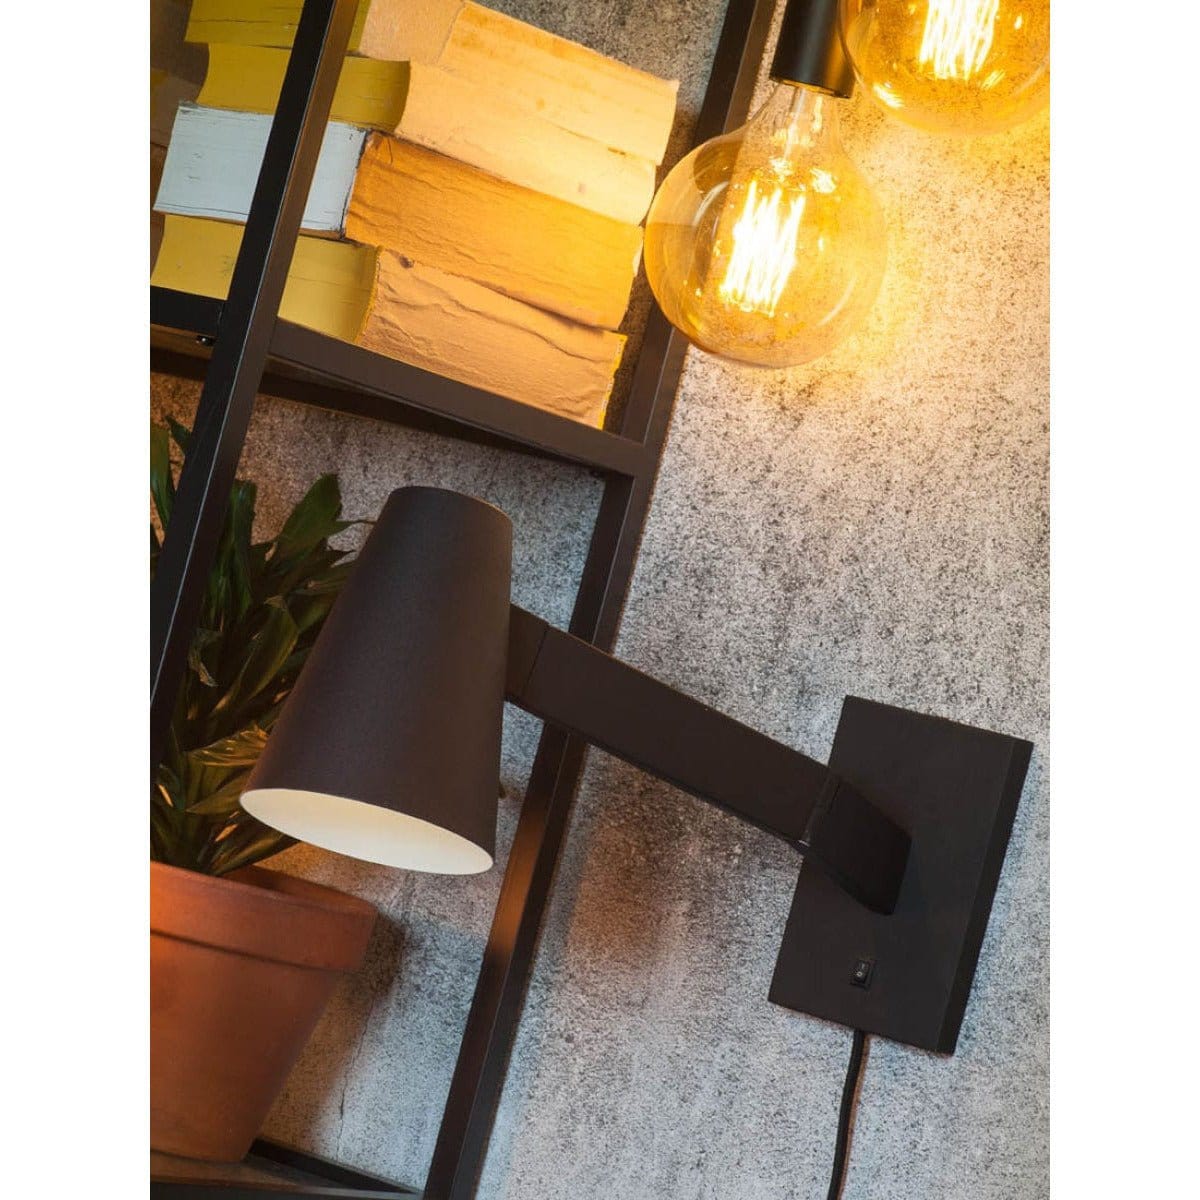 It's About RoMi Wall Lights Biarritz Wall Lamp, black or white